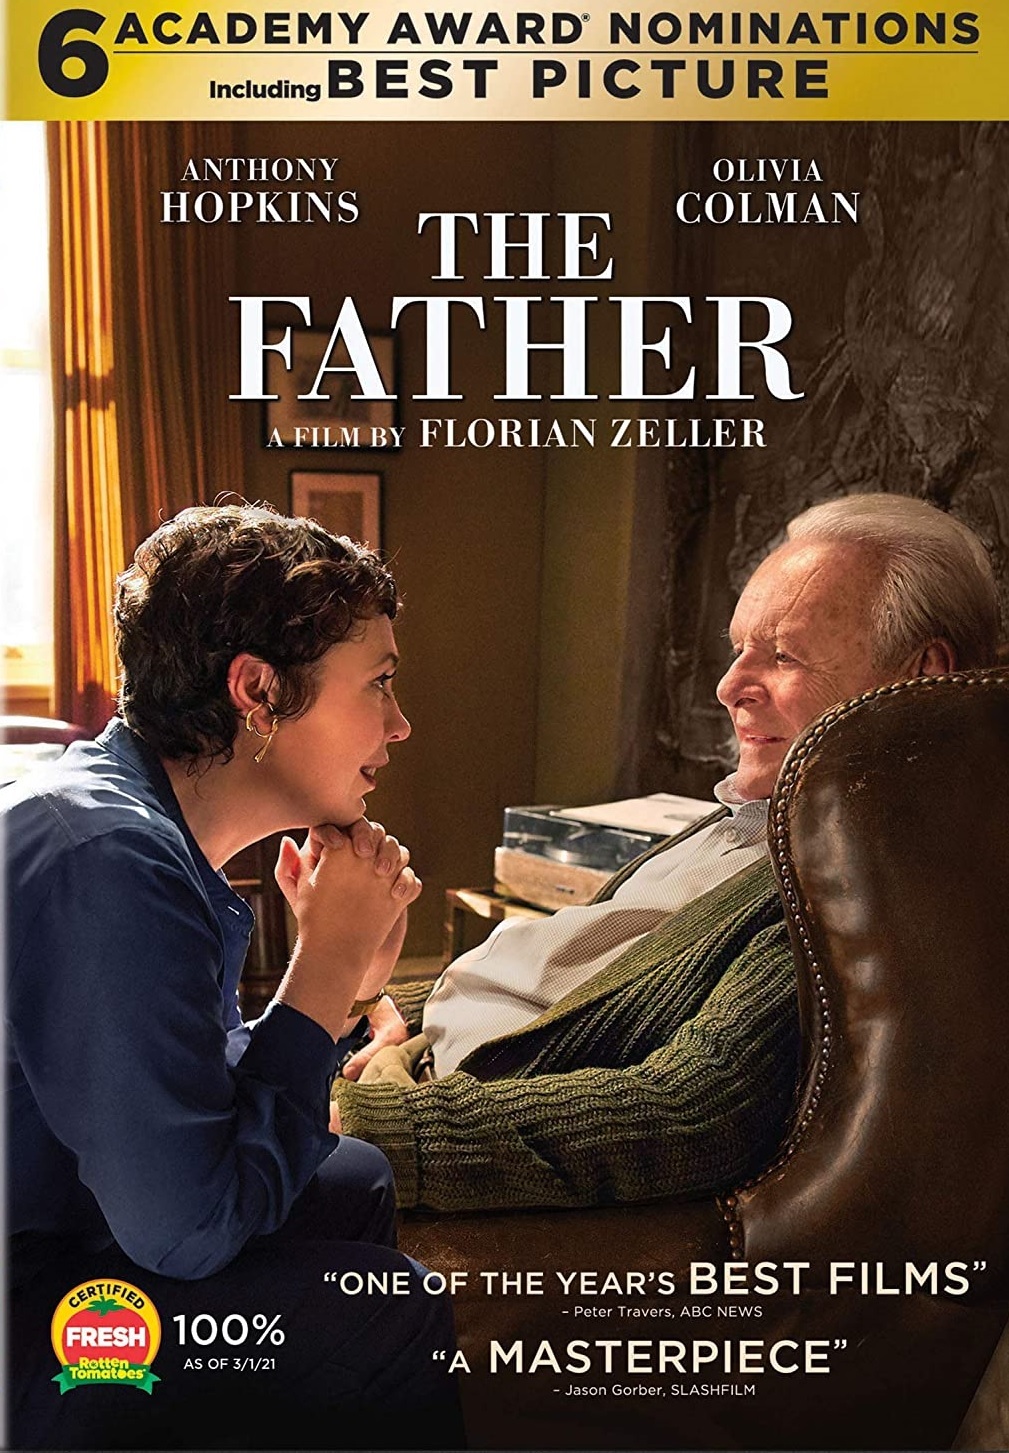 Sony Pictures The father (dvd 2021) refurbished-drama-stars anthony hopkins-ships free!